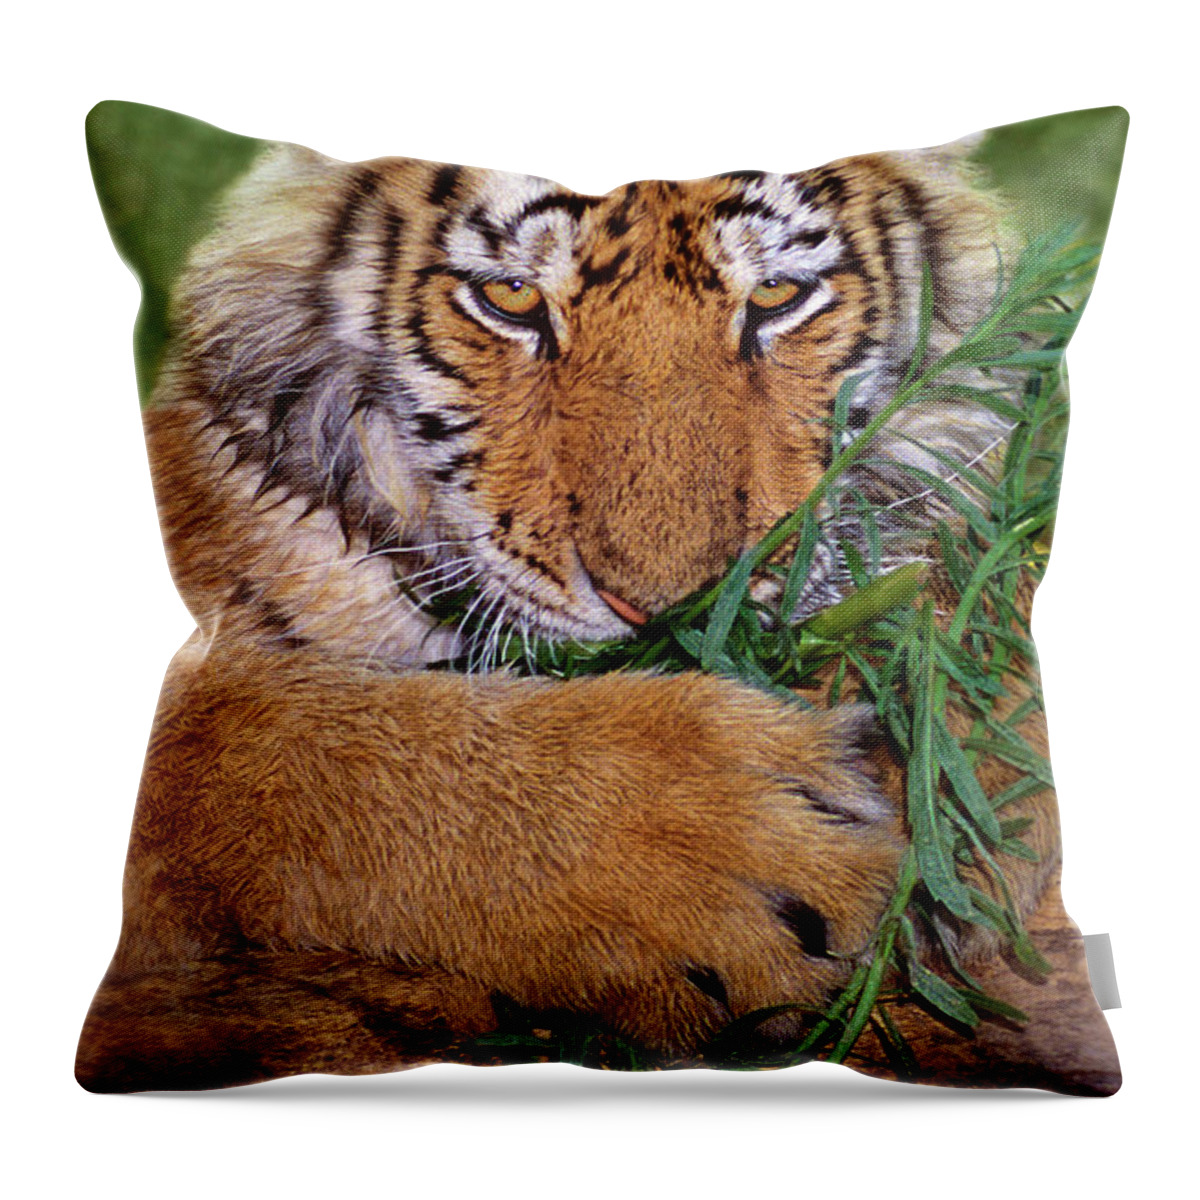 Siberian Tiger Throw Pillow featuring the photograph Siberian Tiger Cub Endangered Species Wildlife Rescue by Dave Welling